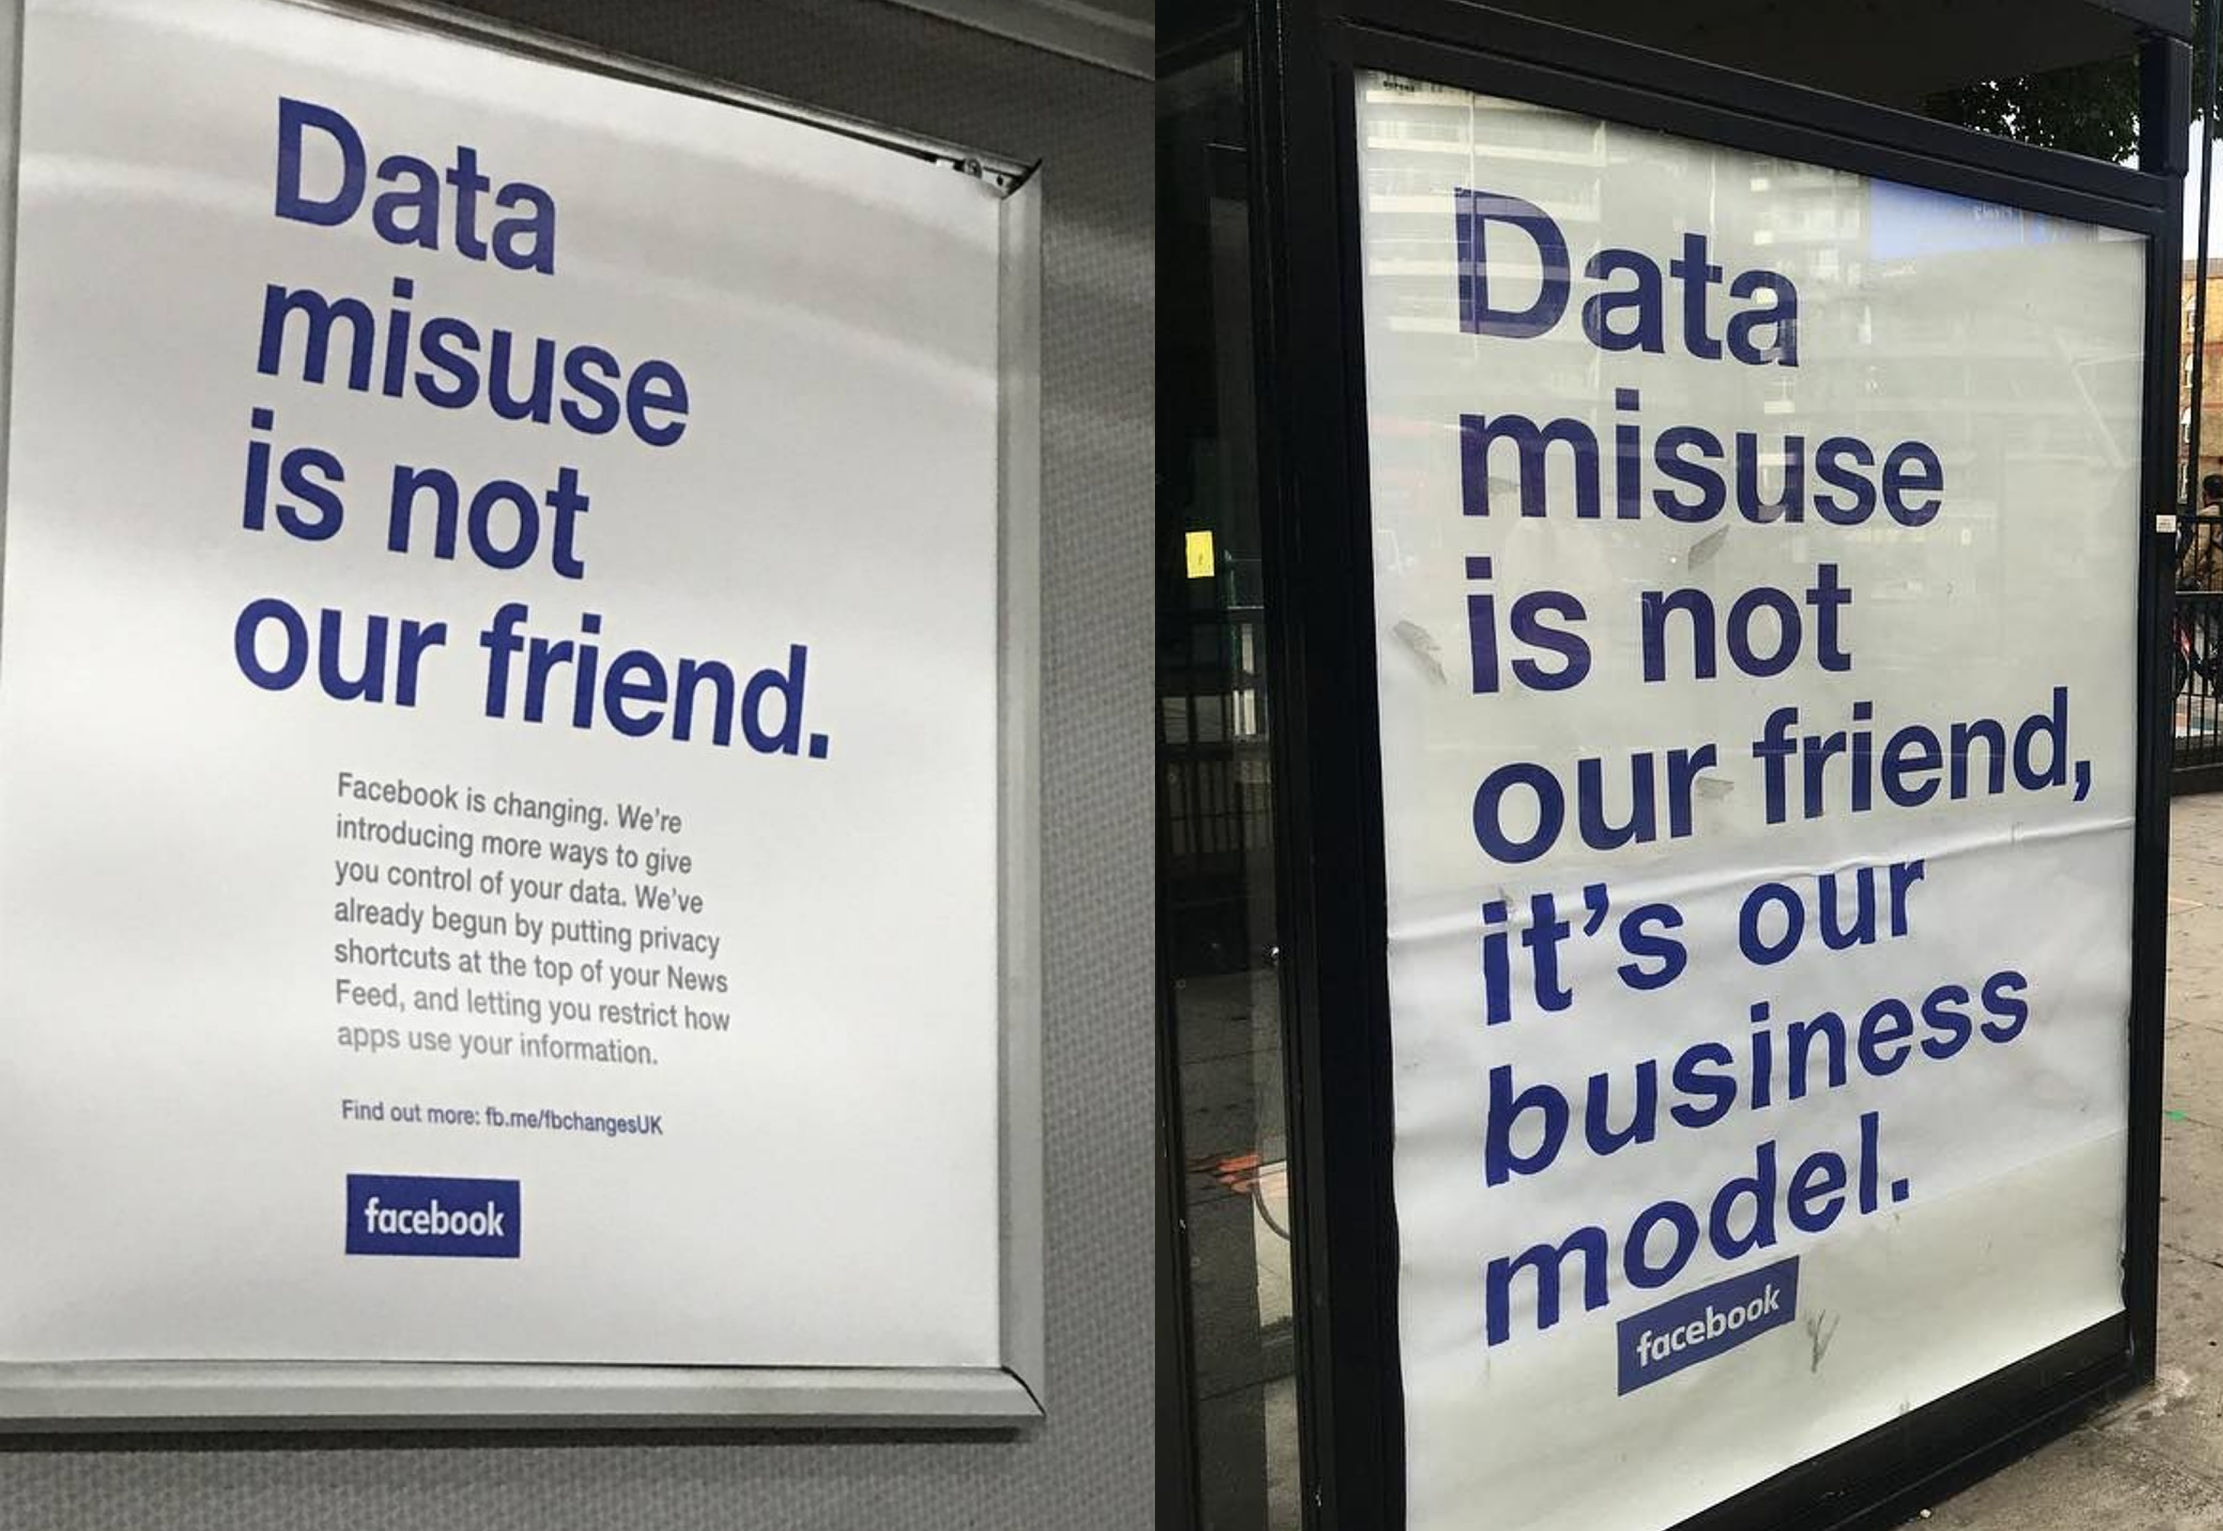 Data Misuse Is Our Business Model